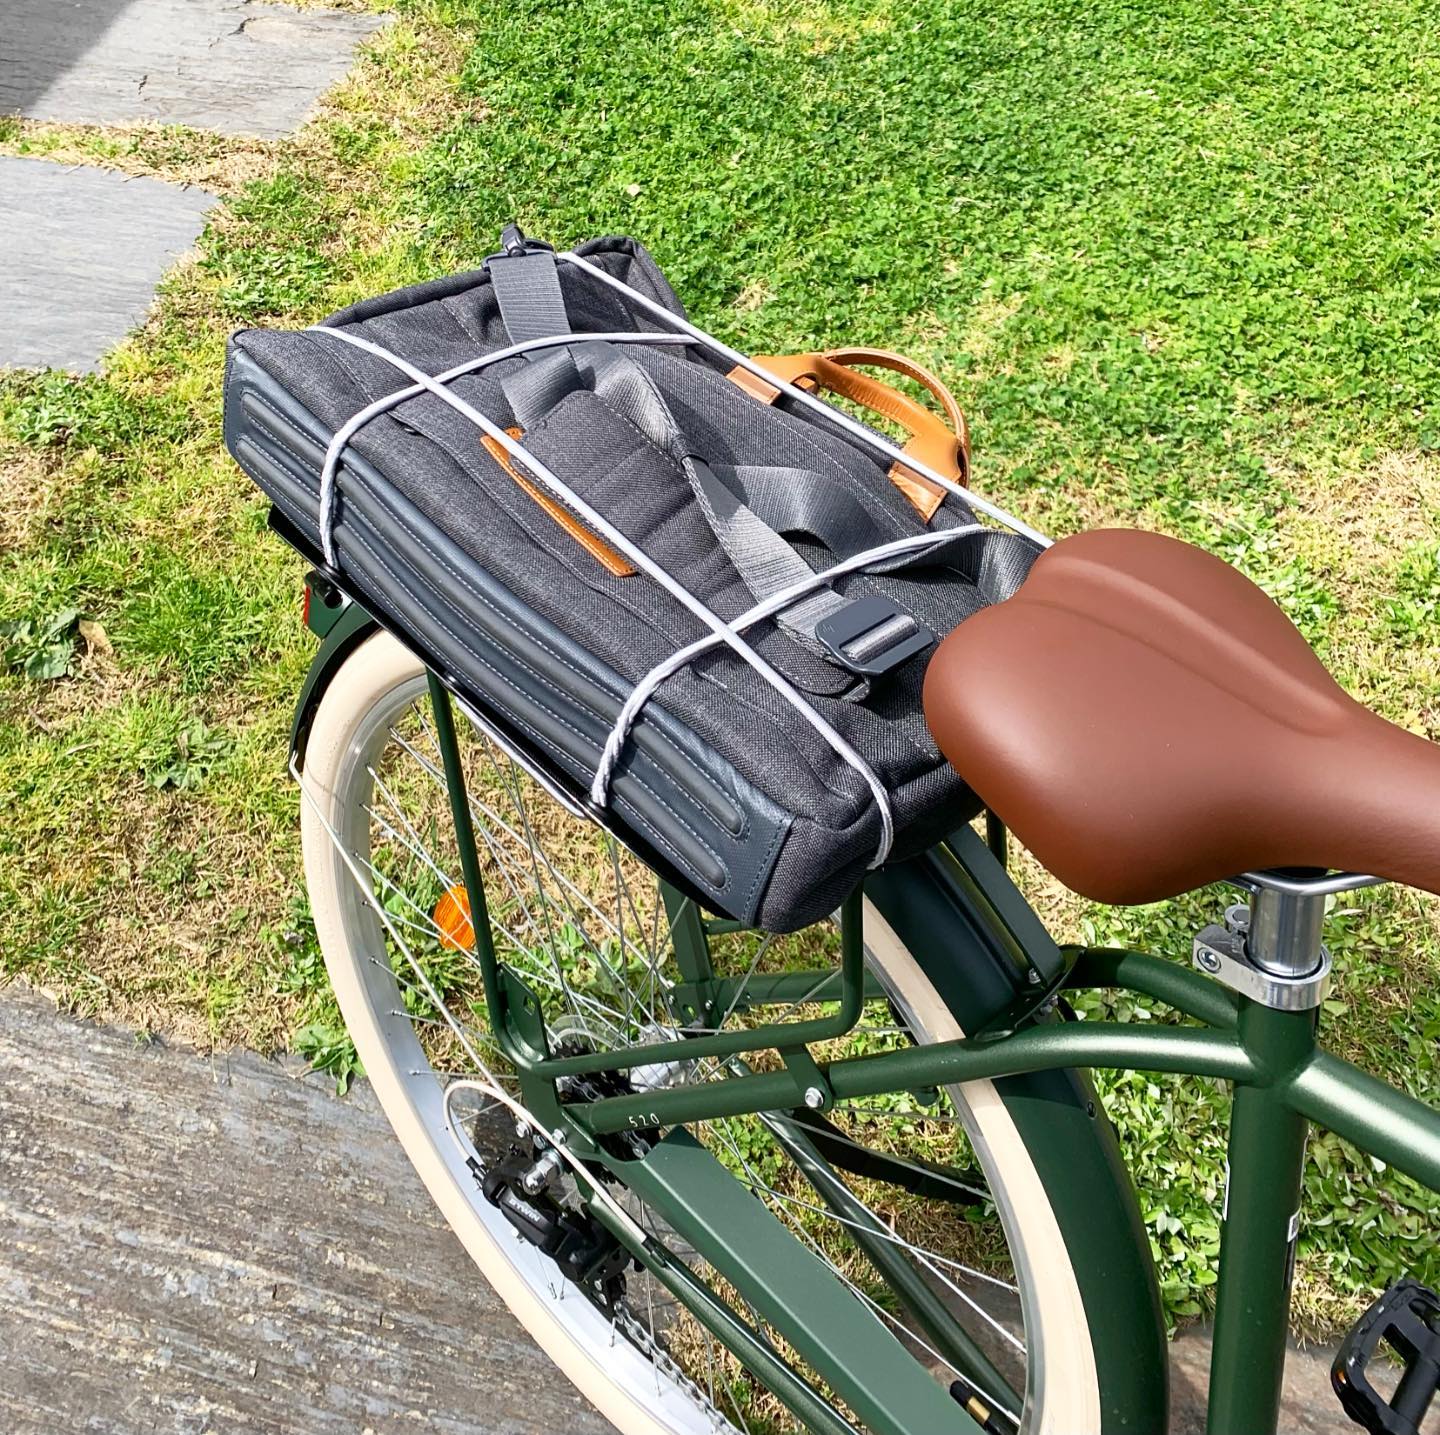 panier-arriere-velo-francais-bags-and-bike-made-in-france